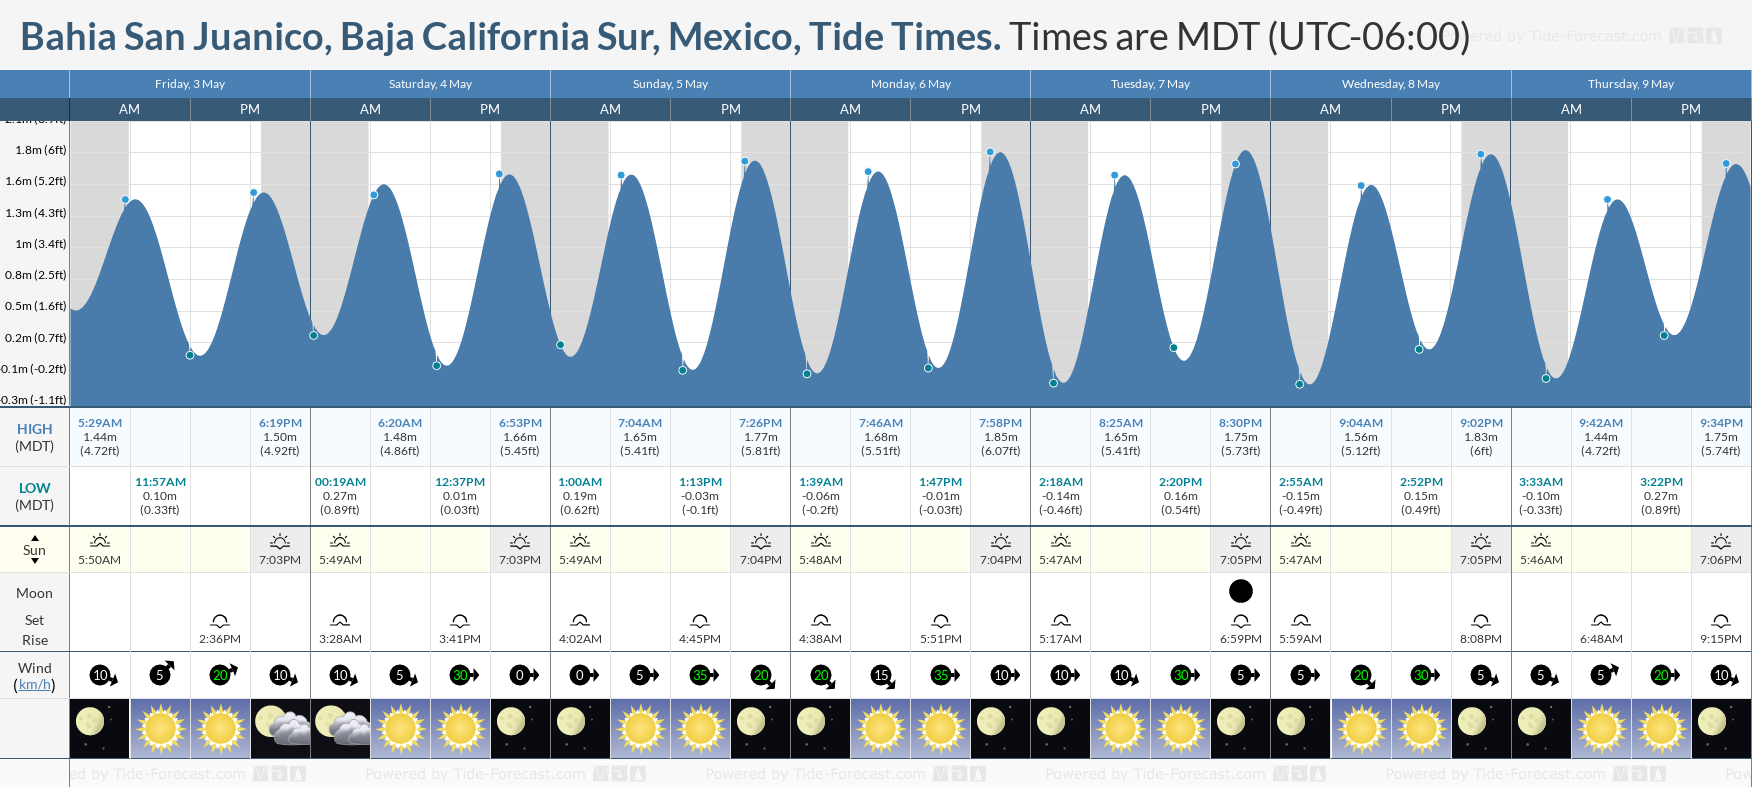 Bahia San Juanico, Baja California Sur, Mexico Tide Chart including high and low tide times for the next 7 days